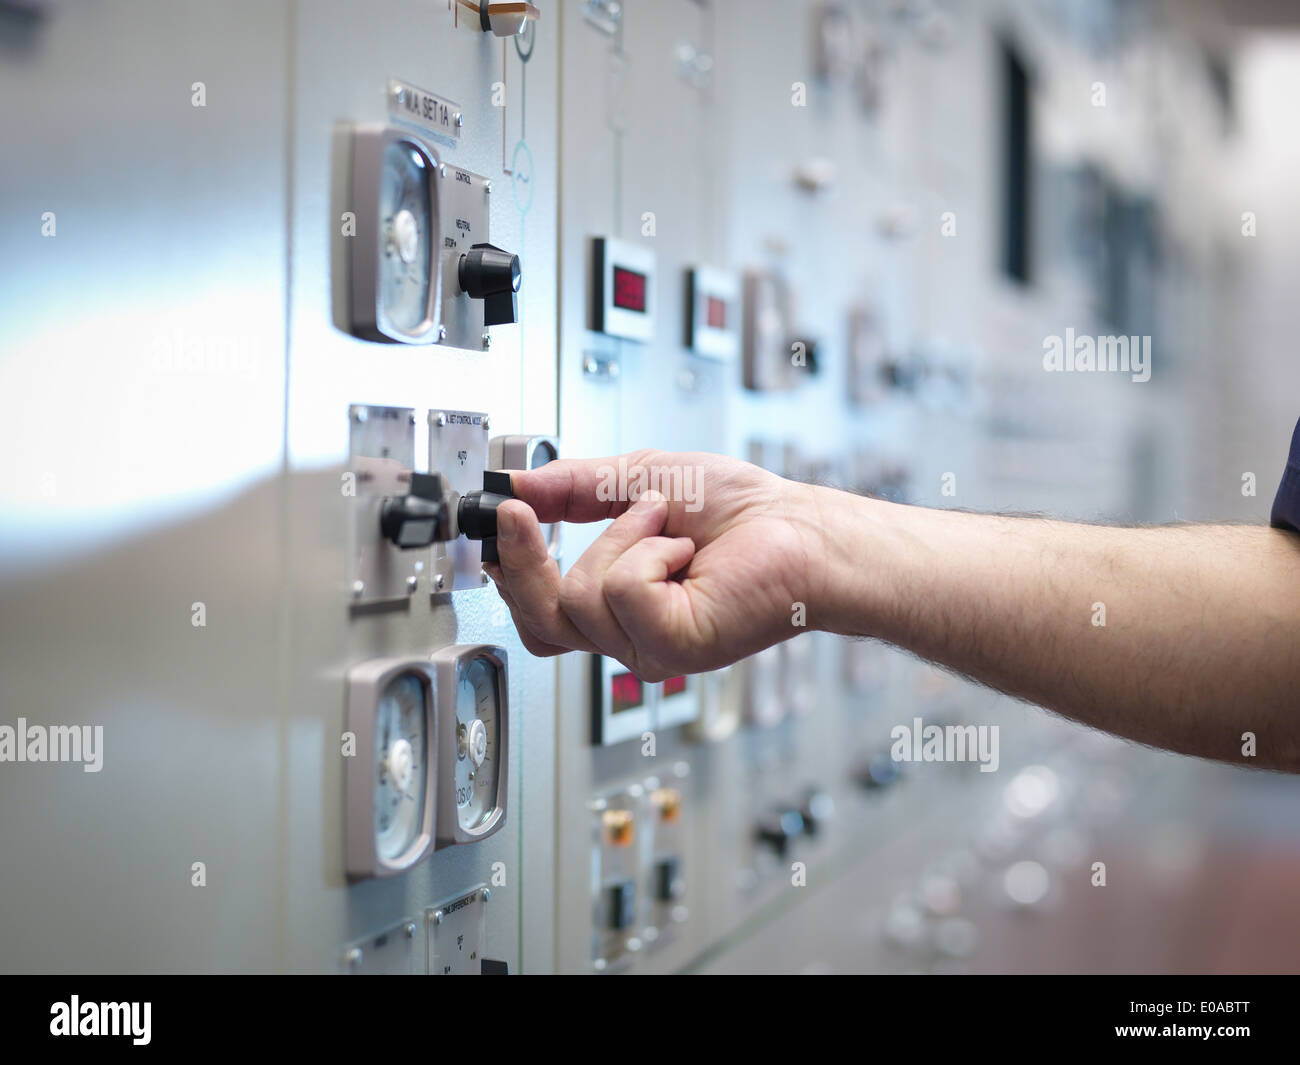 Close up of hand adjusting control in nuclear power station control room simulator Stock Photo